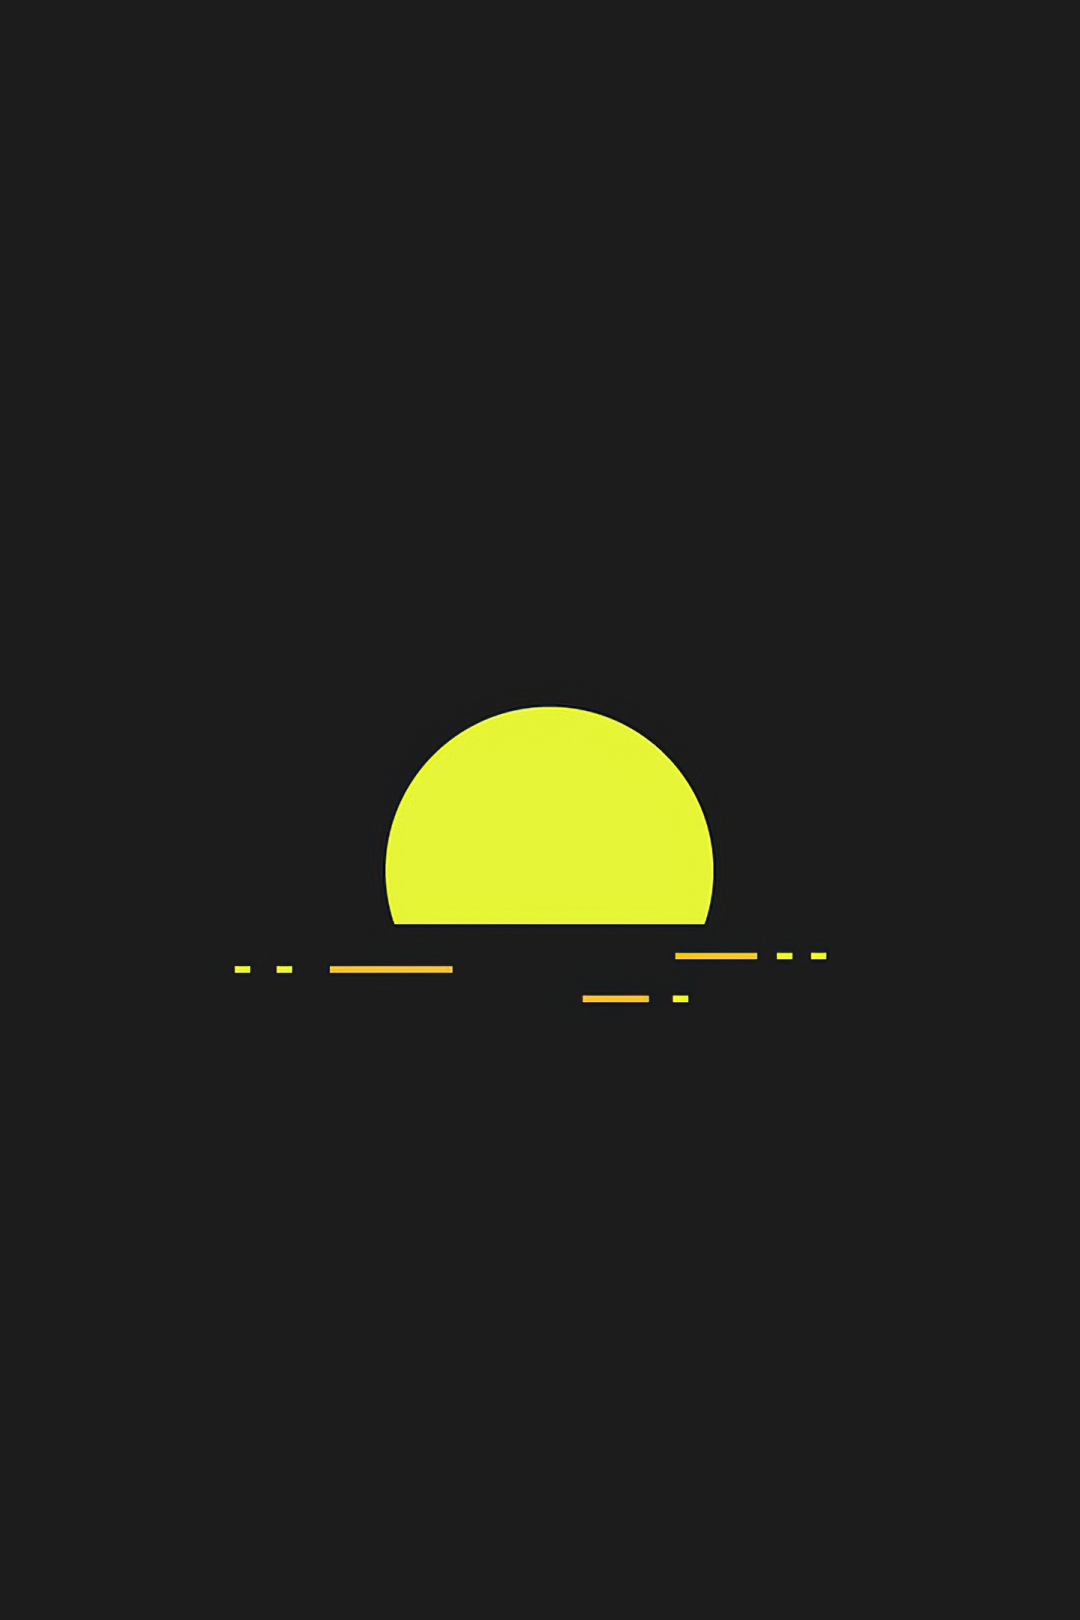 A sunset in the ocean with yellow and black background - Sun